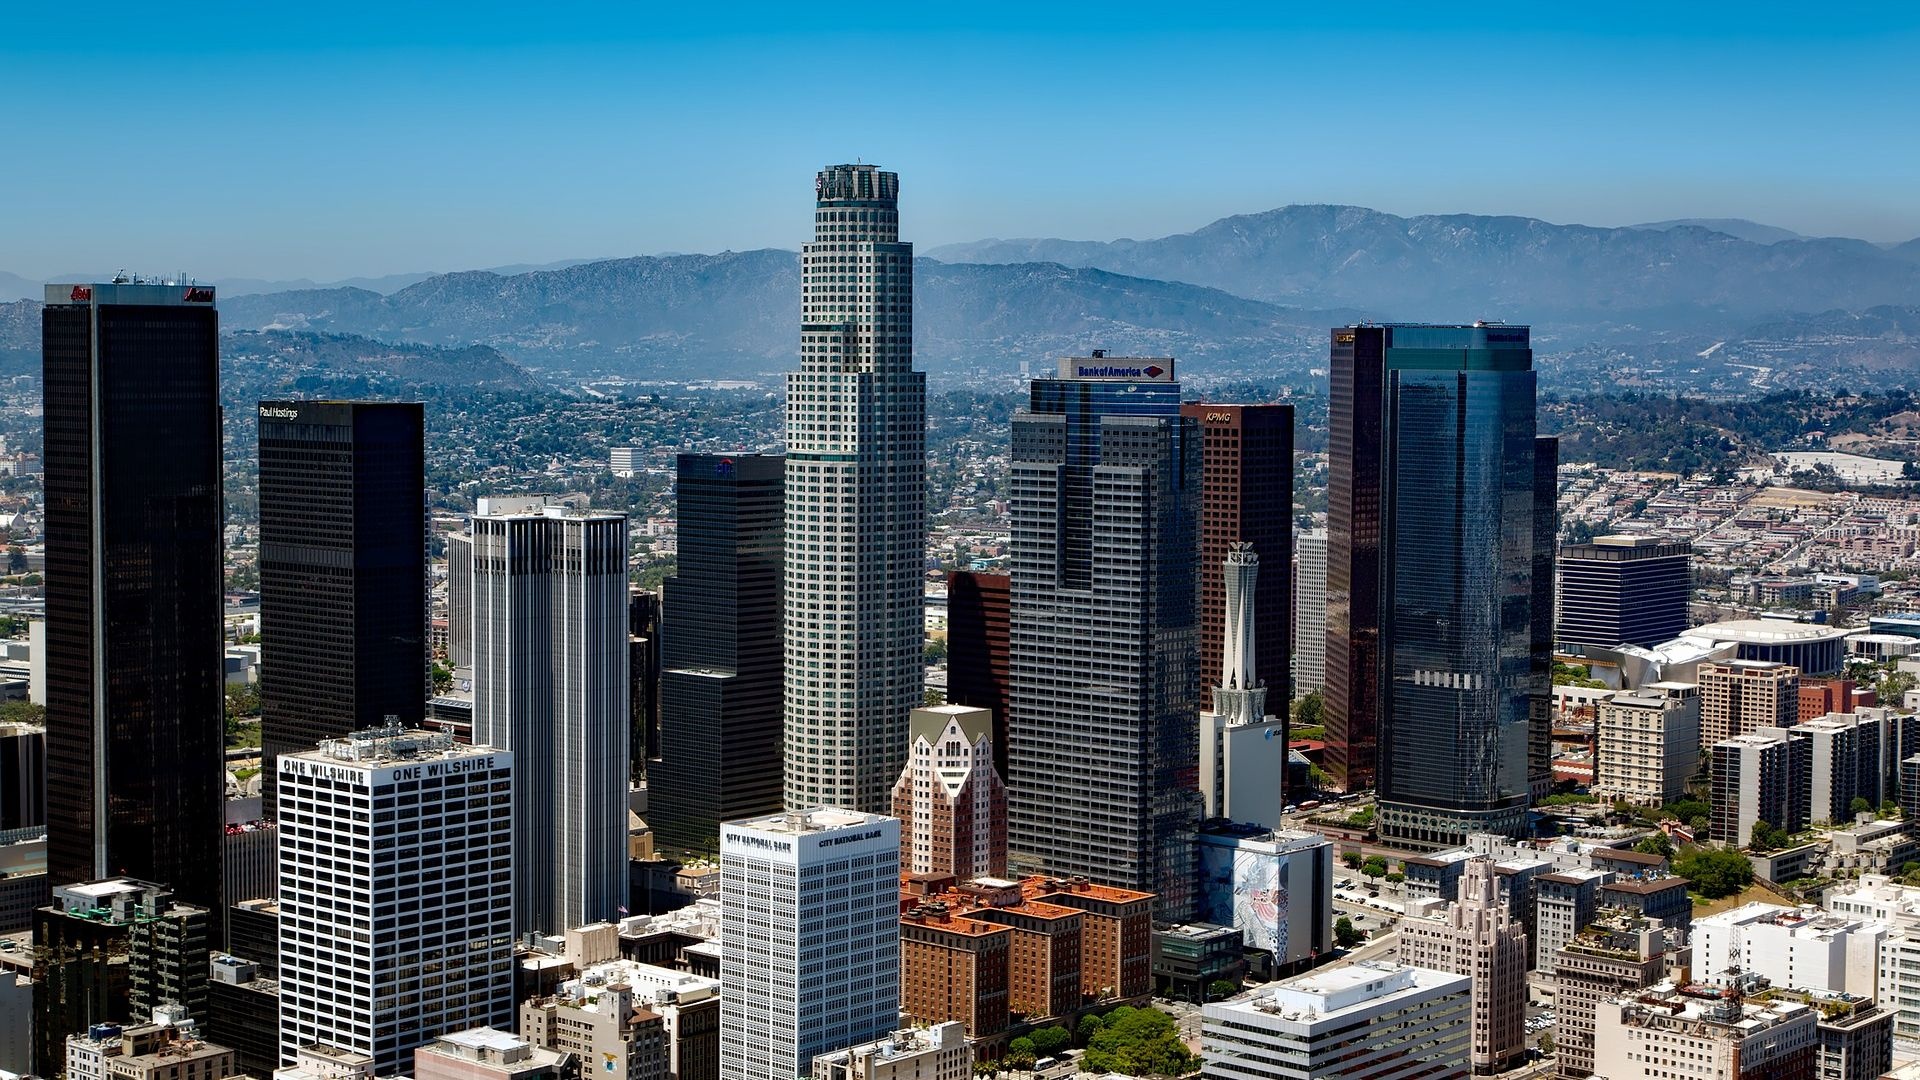 Los Angeles Skyline, Travels, Awesome wallpaper, High quality, 1920x1080 Full HD Desktop